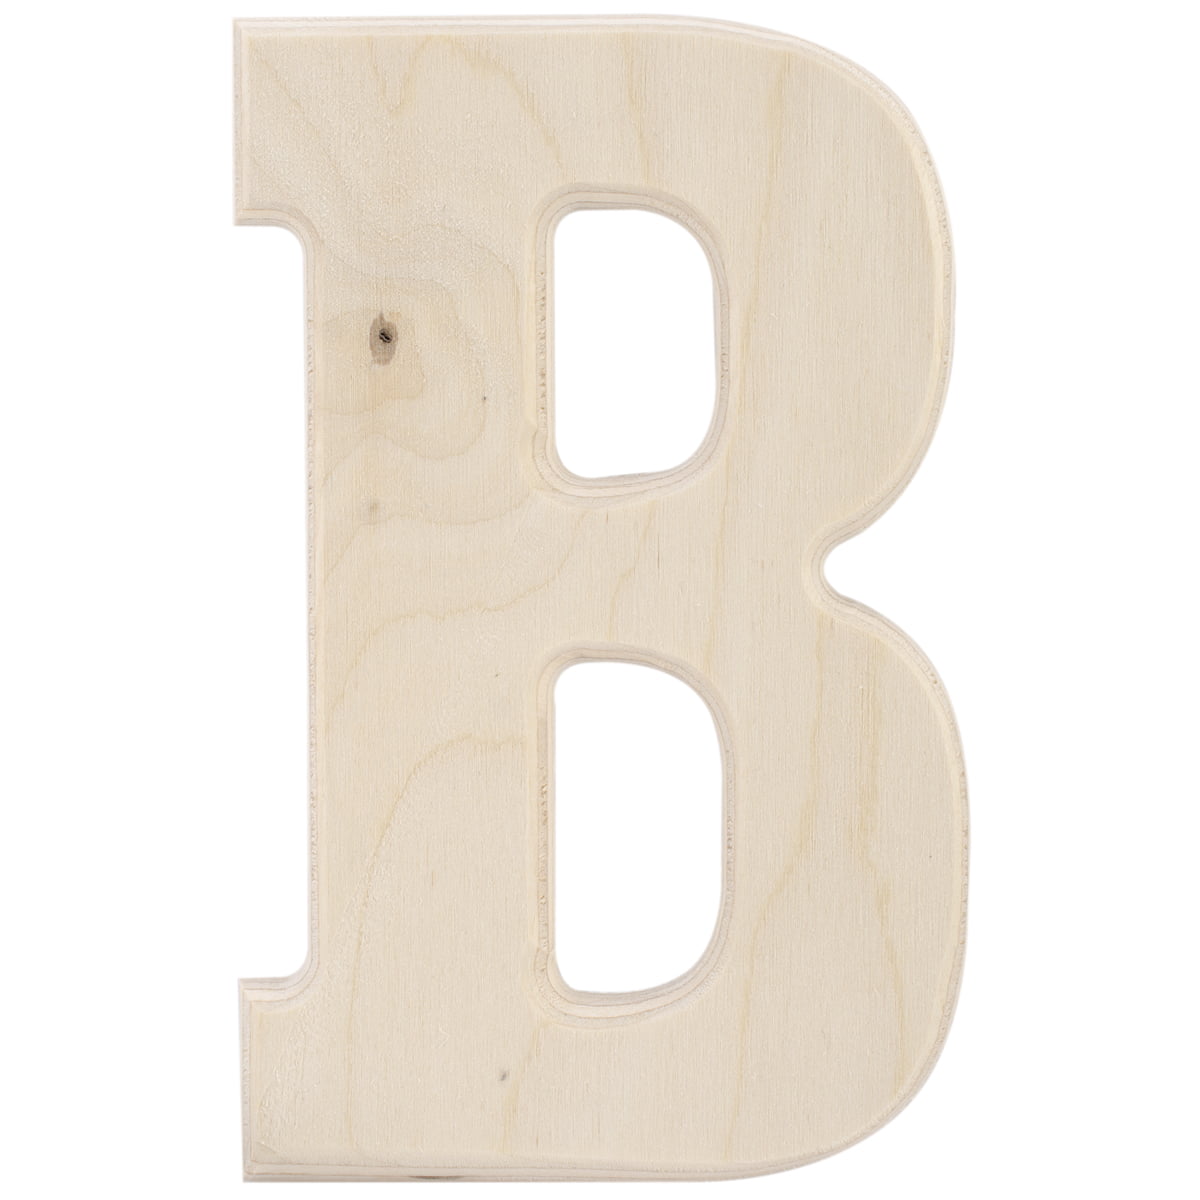 MPI Baltic Birch University Font Letters & Numbers 5.25-8 